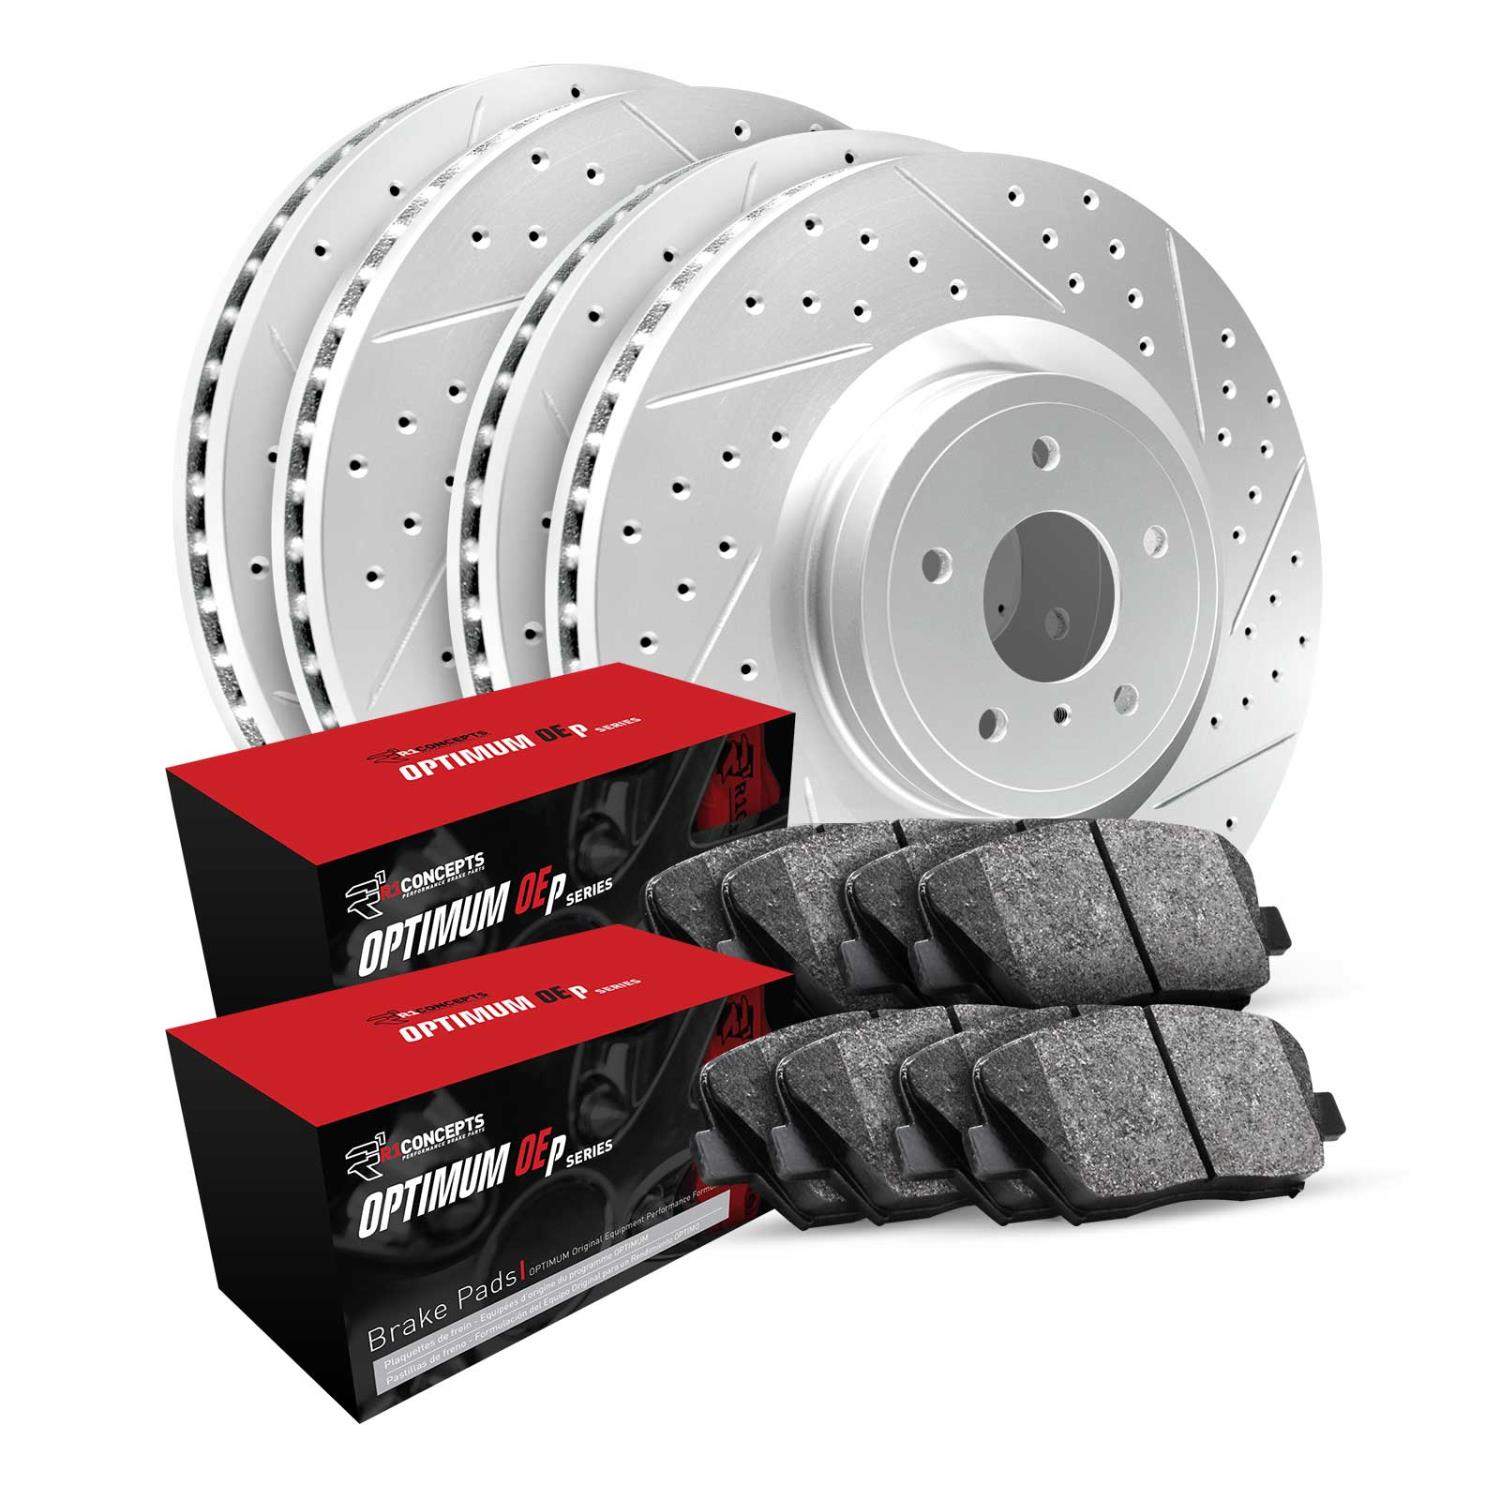 GEO-Carbon Brake Rotor Set w/Optimum OE Pads, 2020-2020 Fits Multiple Makes/Models, Position: Front & Rear